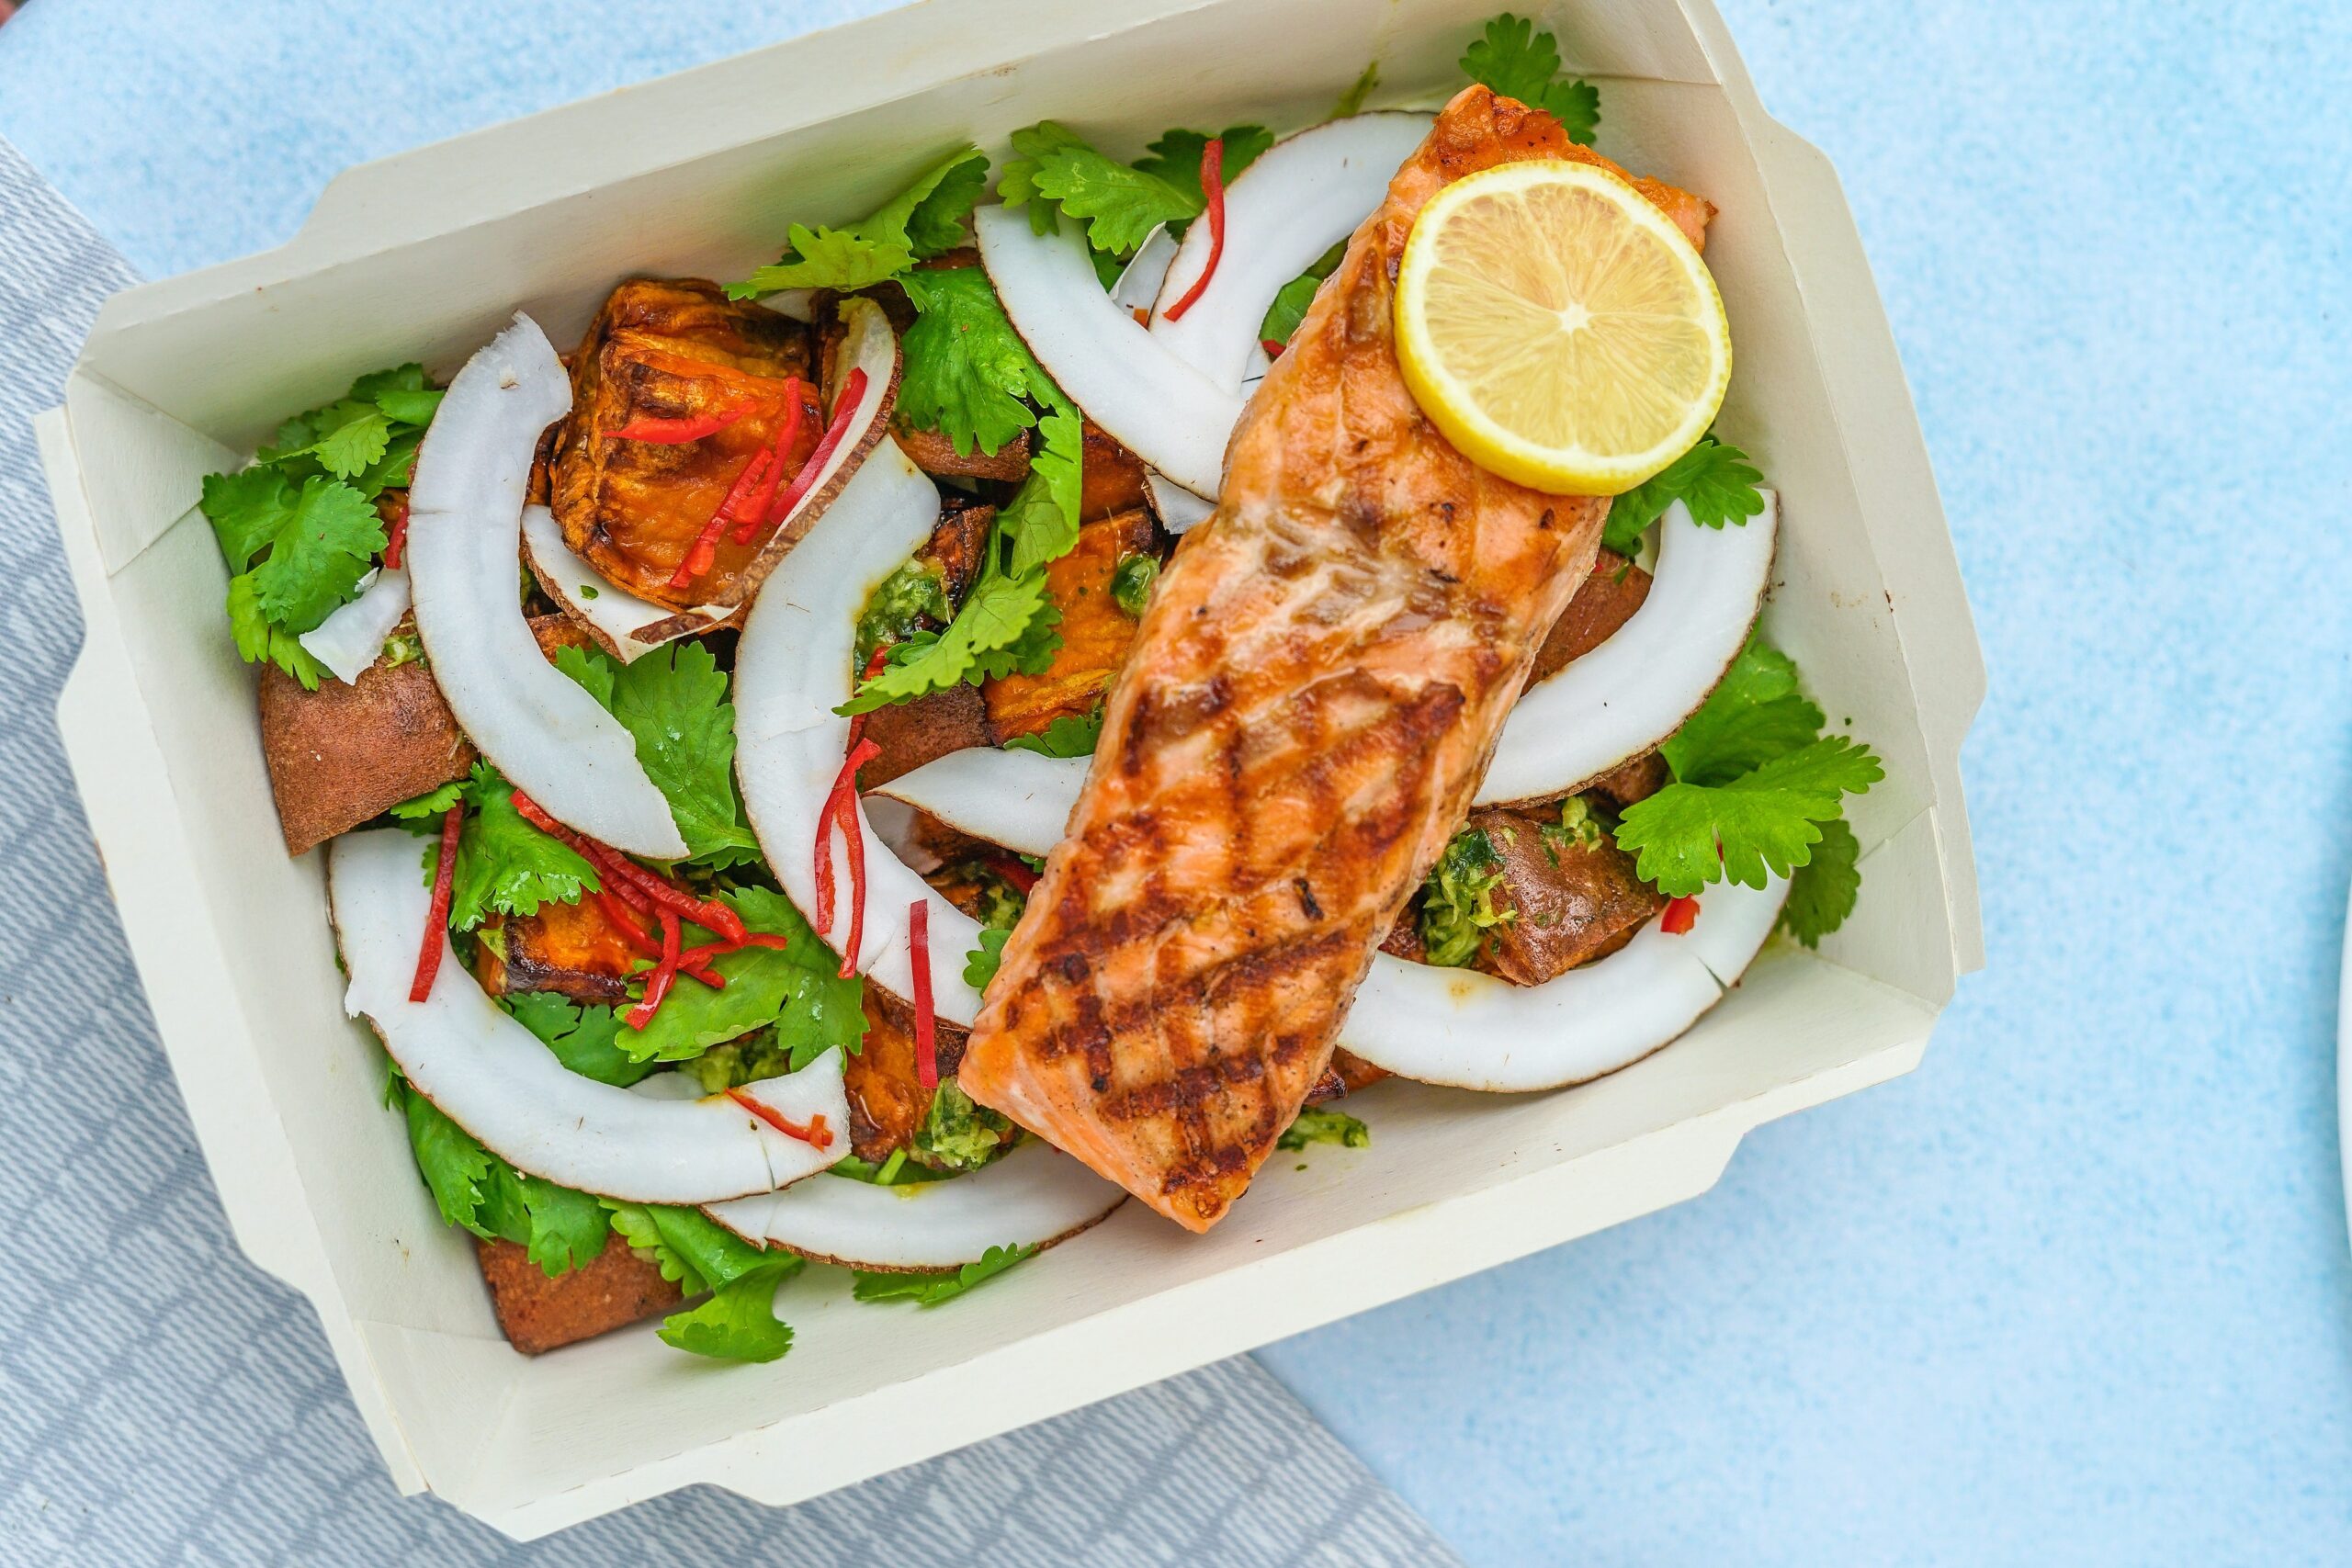 Notpla – Just Eat expands trial of seaweed-coated takeaway boxes